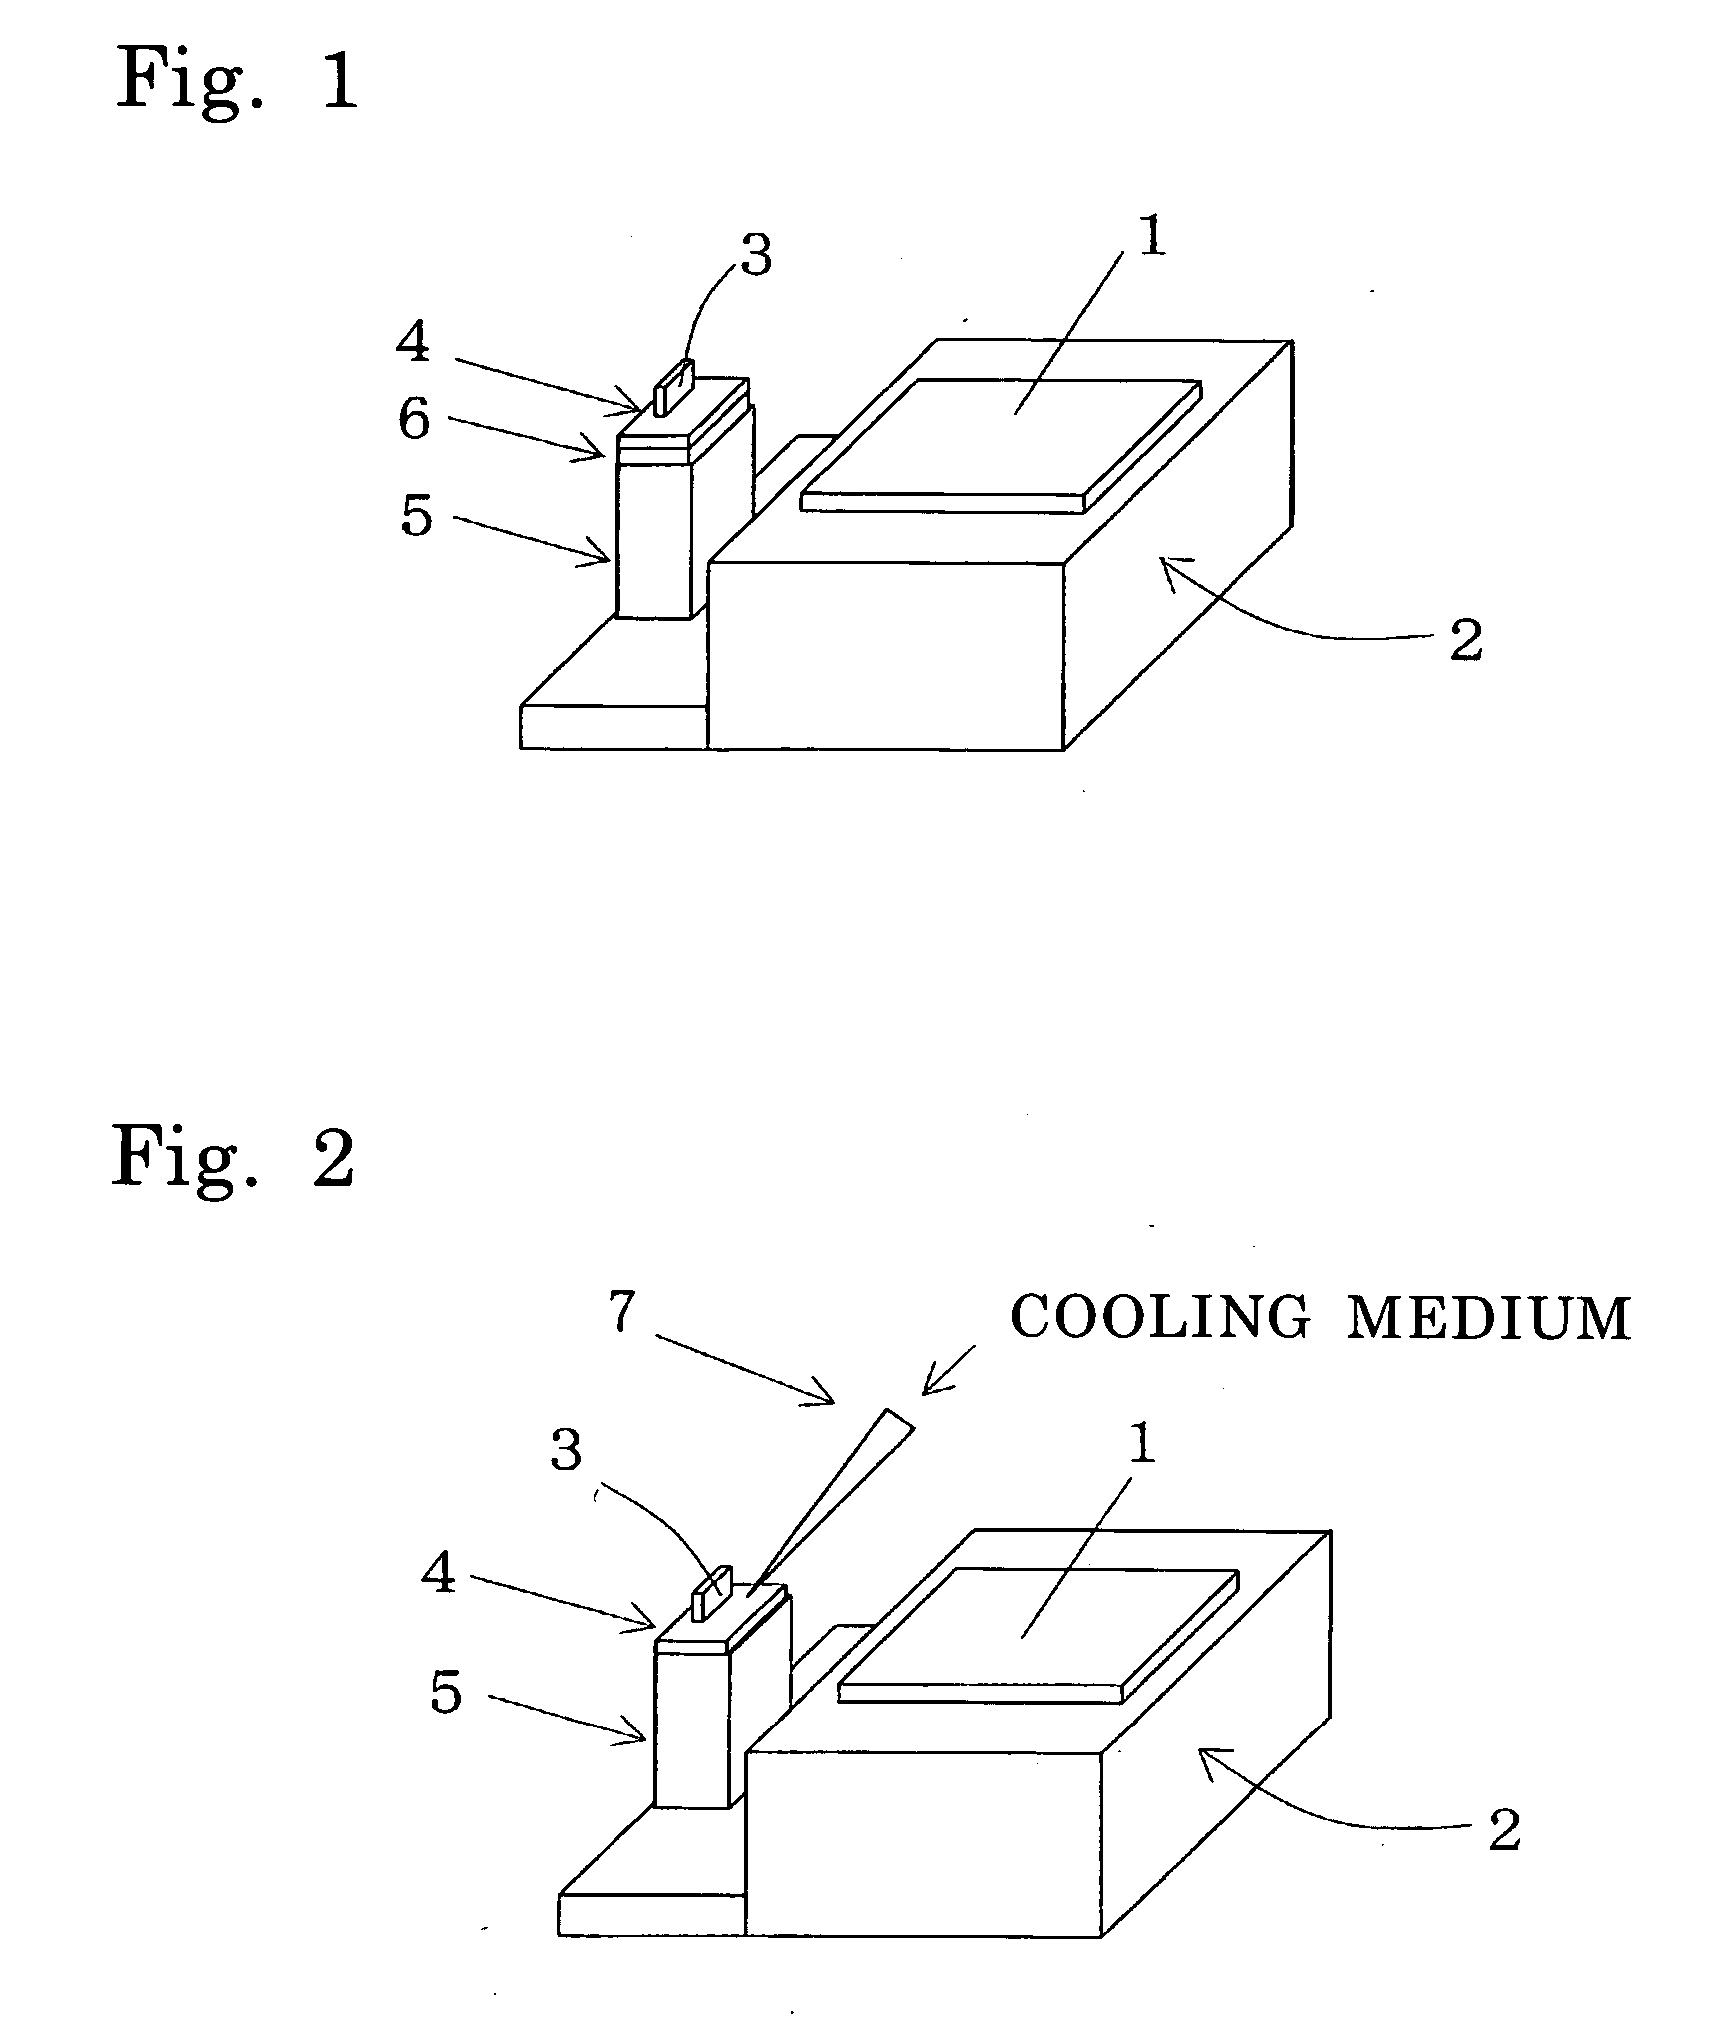 Processing apparatus using focused charged particle beam